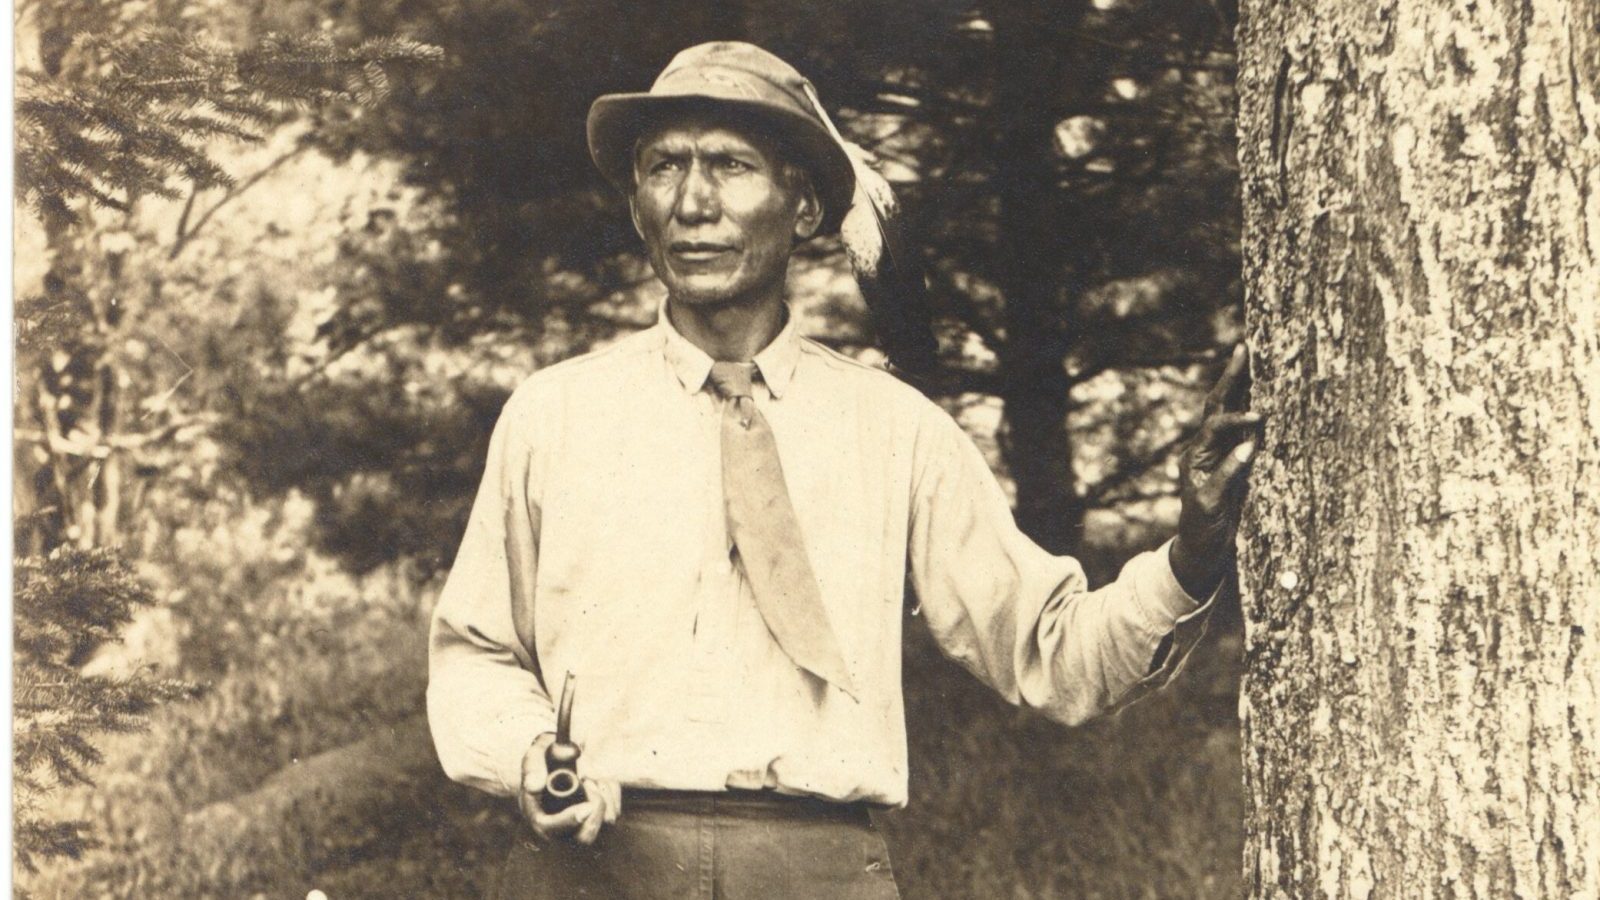 Charles Eastman with one hand on tree and other hand holding a smoking pipe